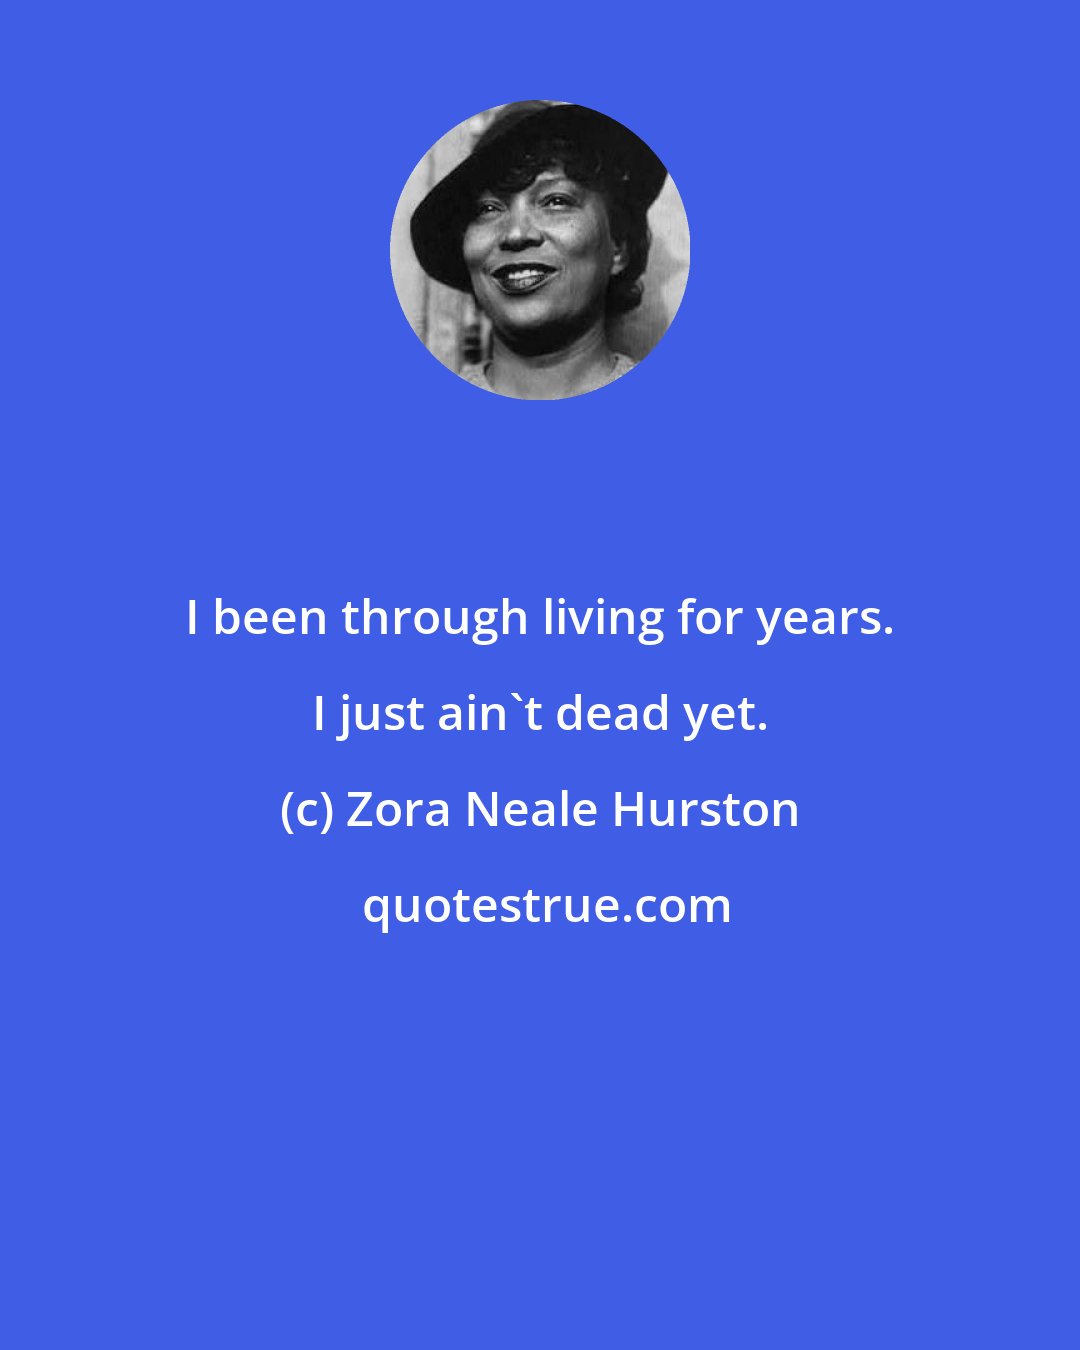 Zora Neale Hurston: I been through living for years. I just ain't dead yet.